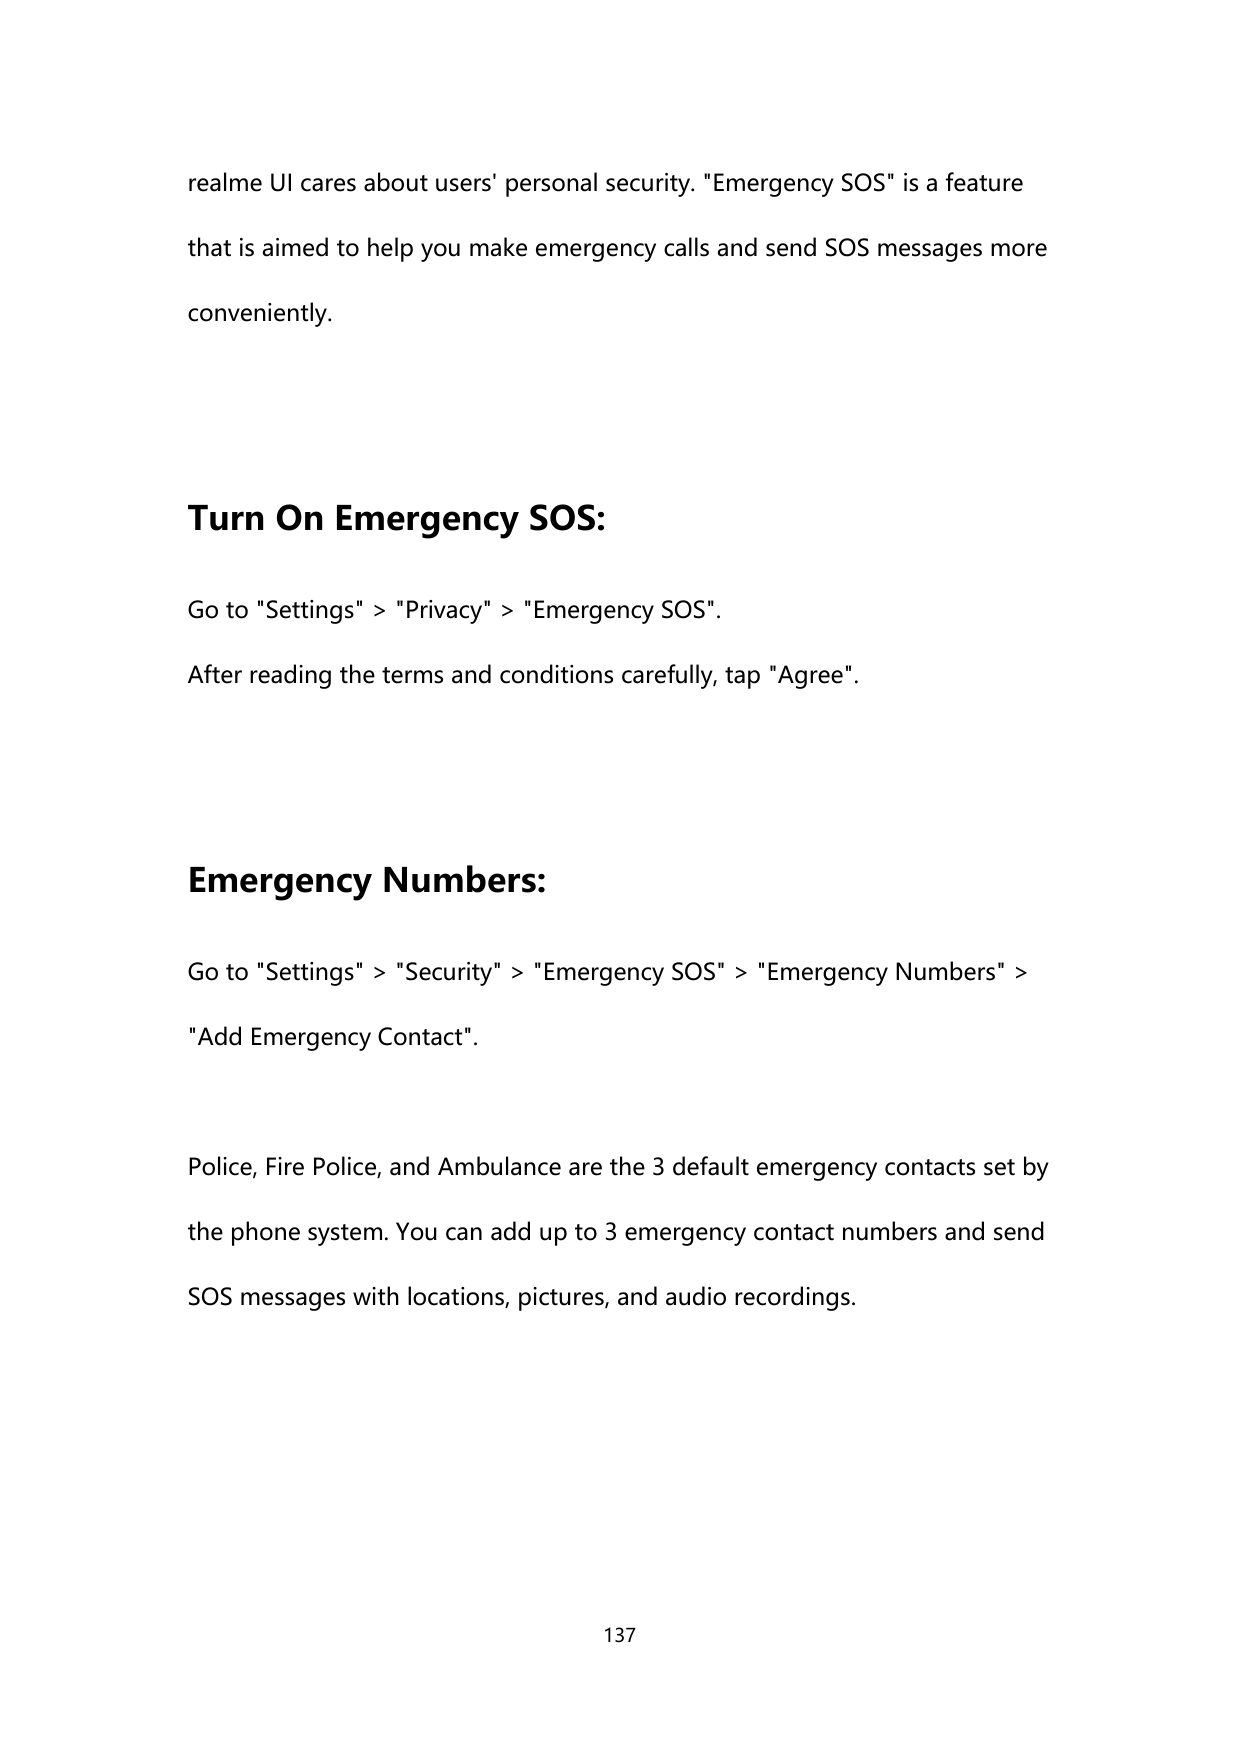 realme UI cares about users' personal security. "Emergency SOS" is a featurethat is aimed to help you make emergency calls and s